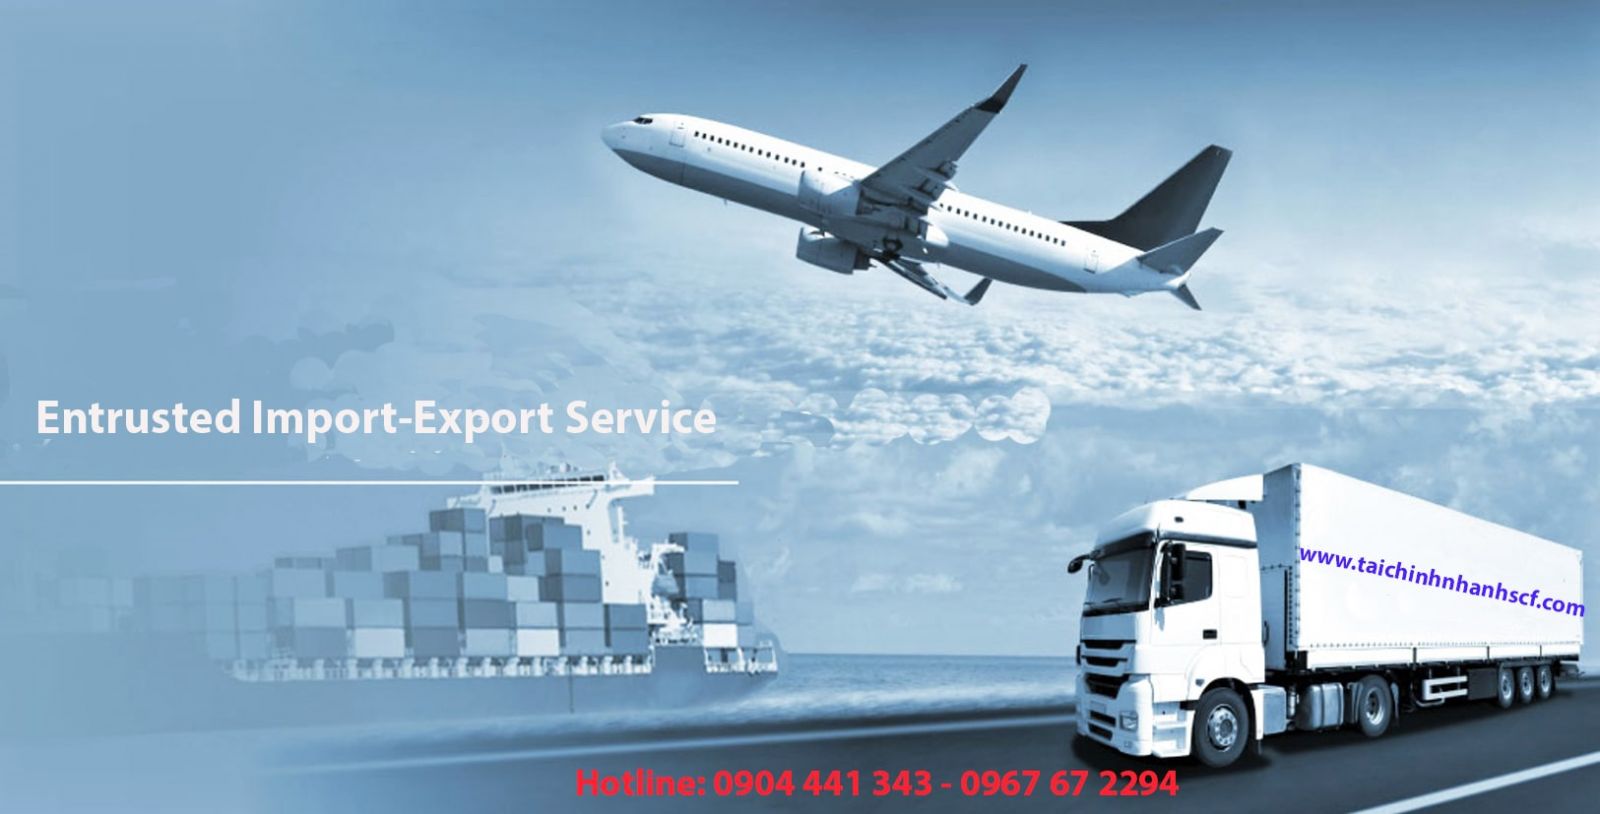 Entrusted Import-Export Service